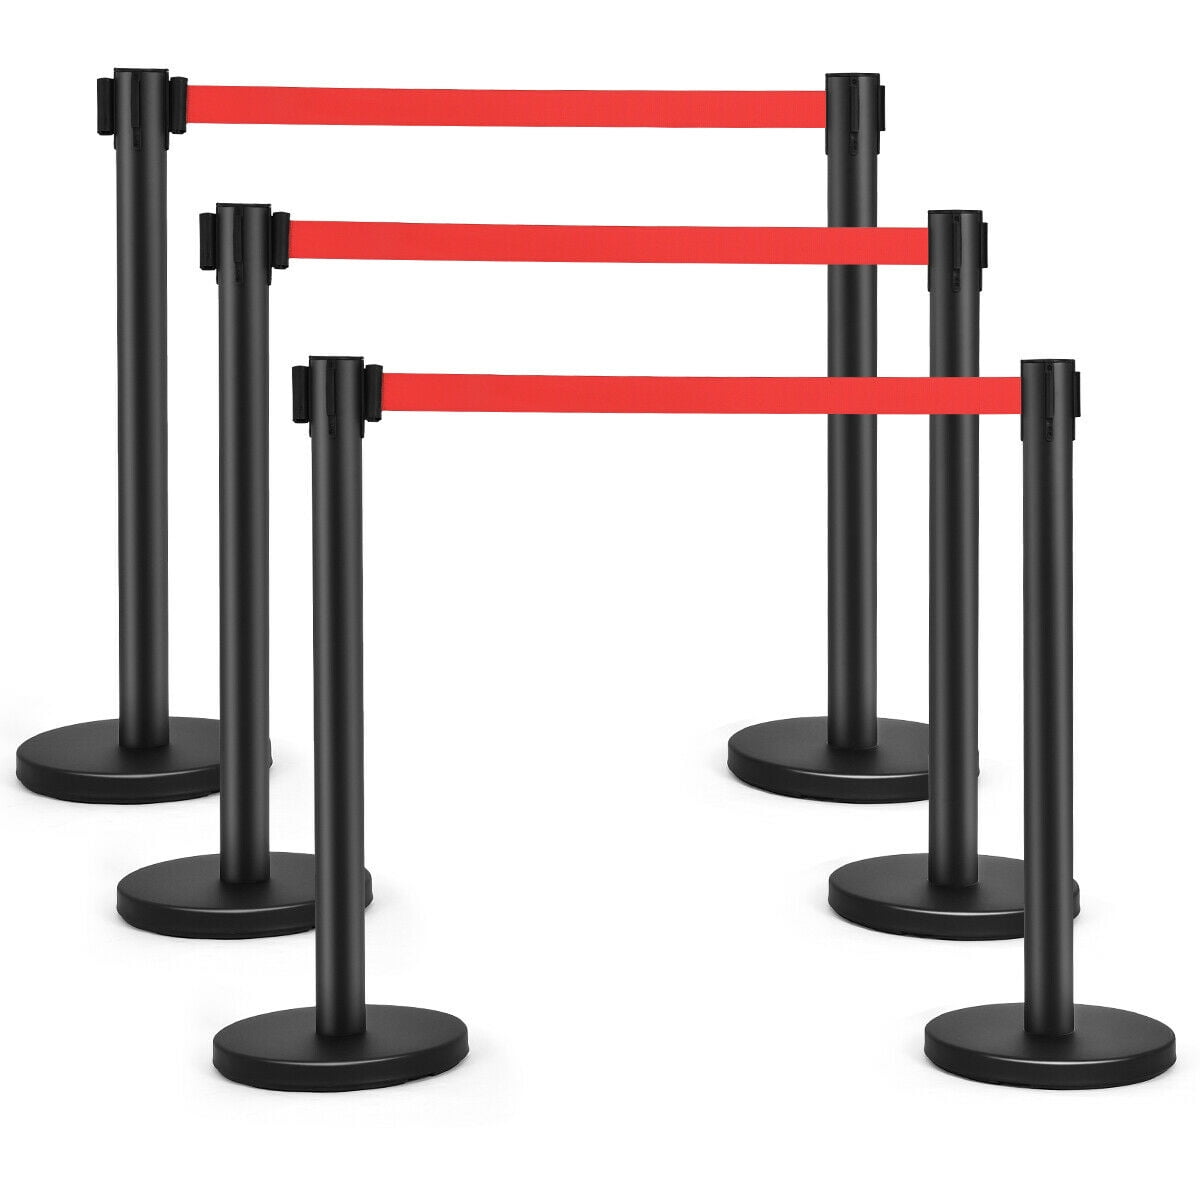 2 Pieces Electriduct Black Stanchion with Red Retractable Belt 35 Crowd Control Queue Pole Metal Post 